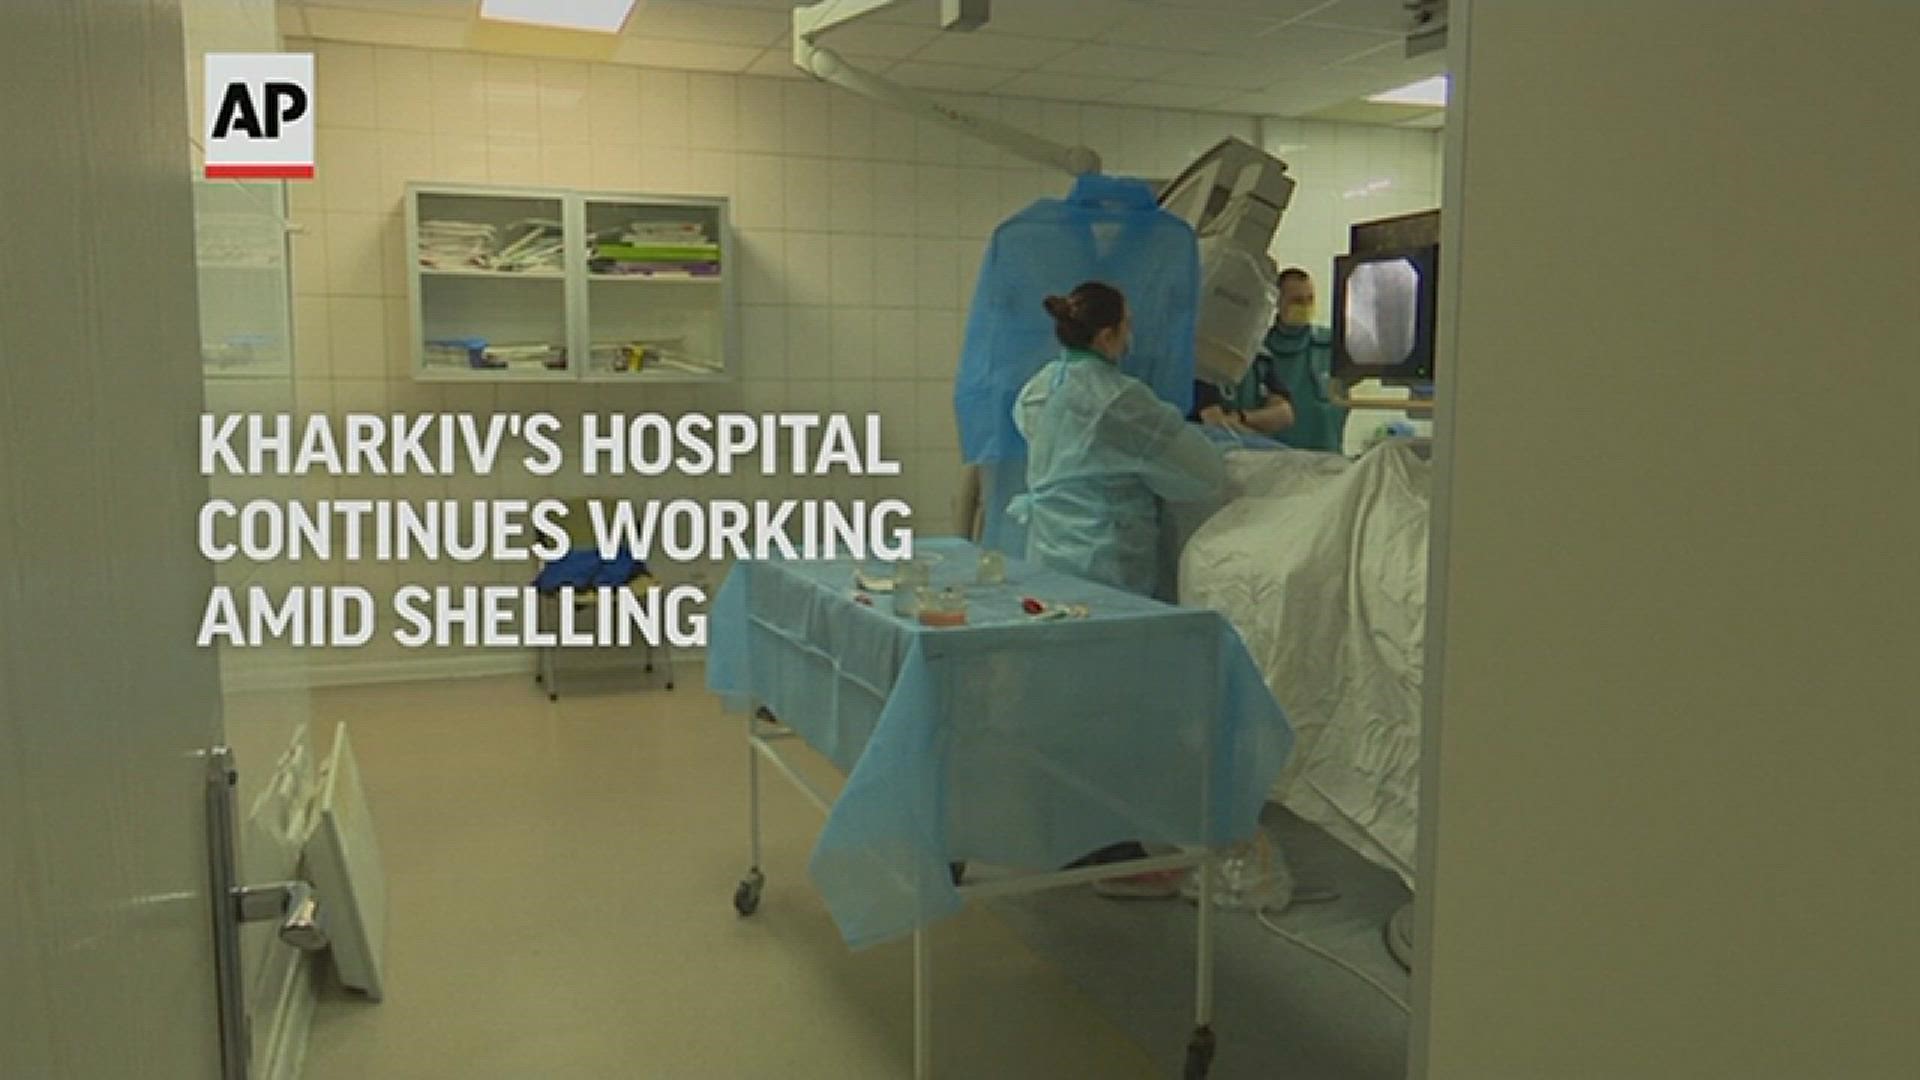 Kharkiv's hospital staff continue with their work amid Russia's shelling of the city, drowning out the sounds with hard rock and jazz music.